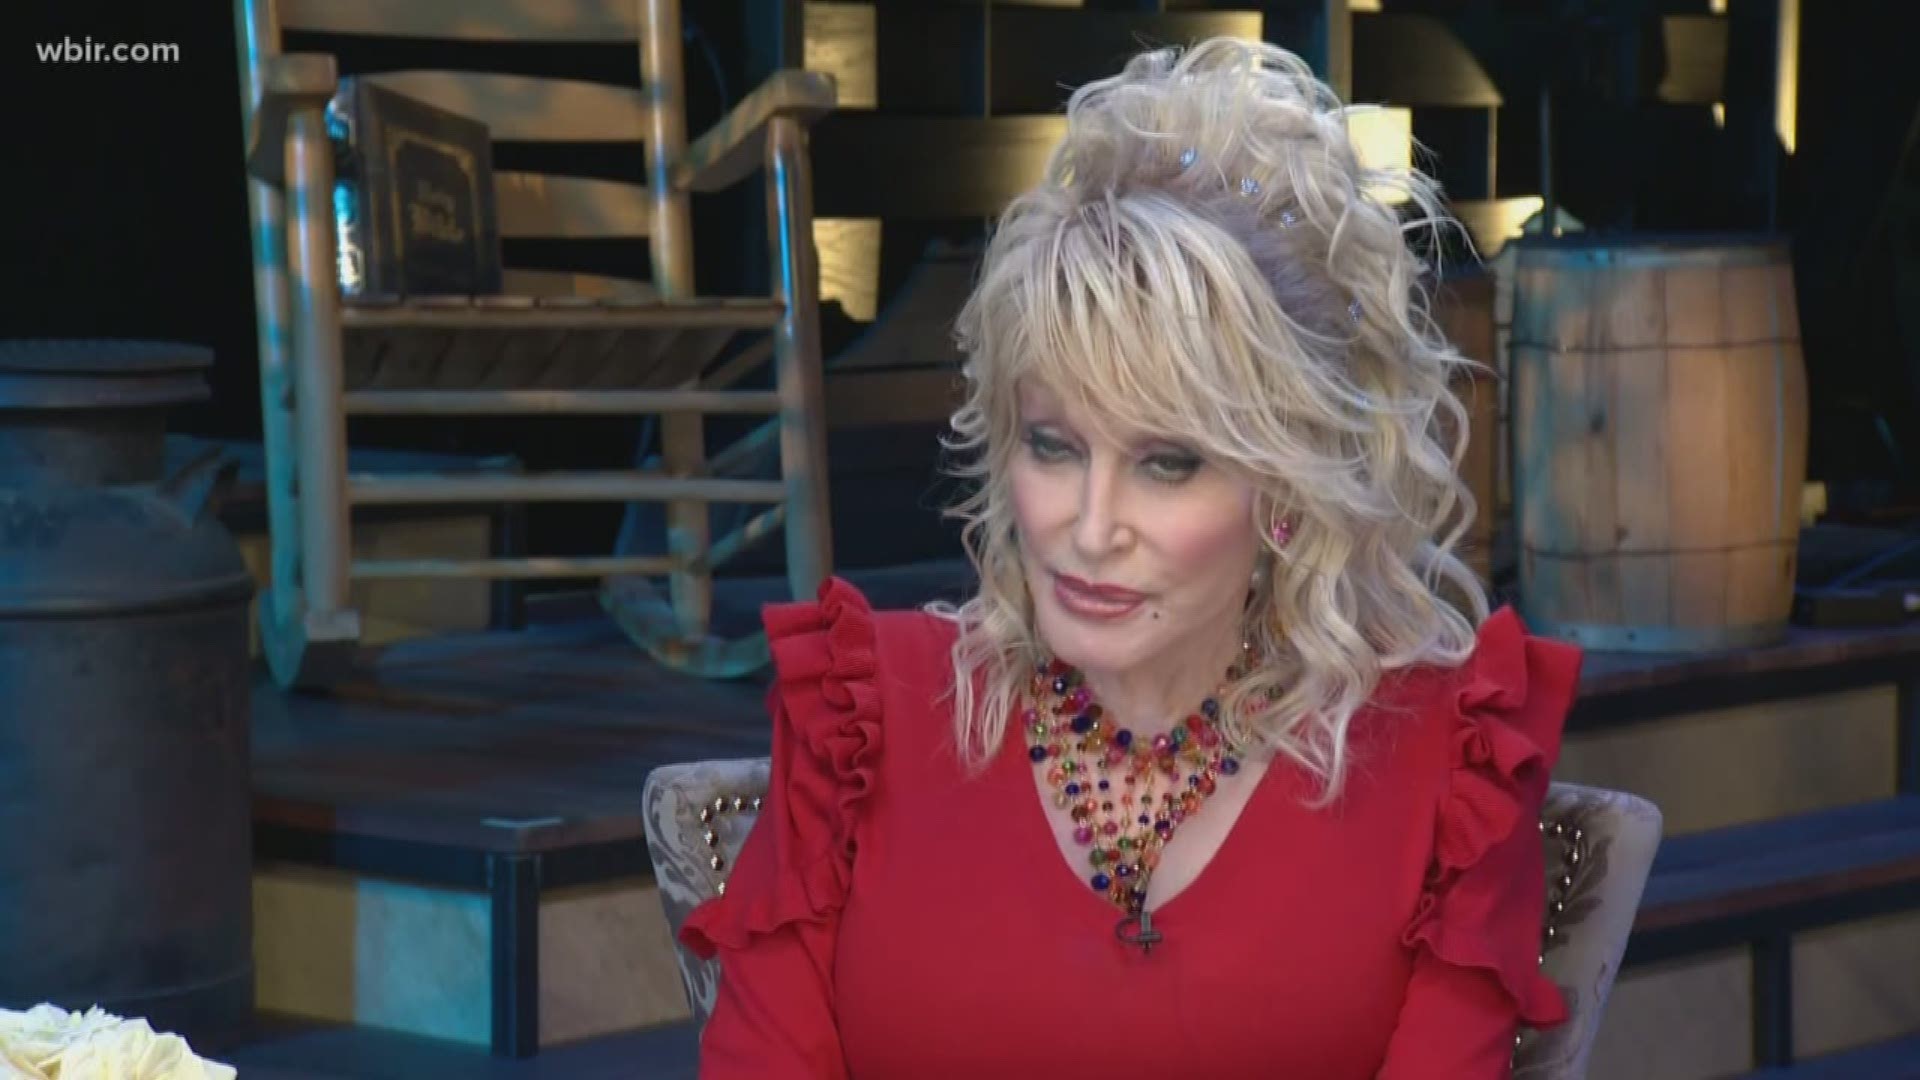 Dollywood welcomed in the 2019 season today, but for Dolly -- she is preparing to welcome a new Netflix series this fall.